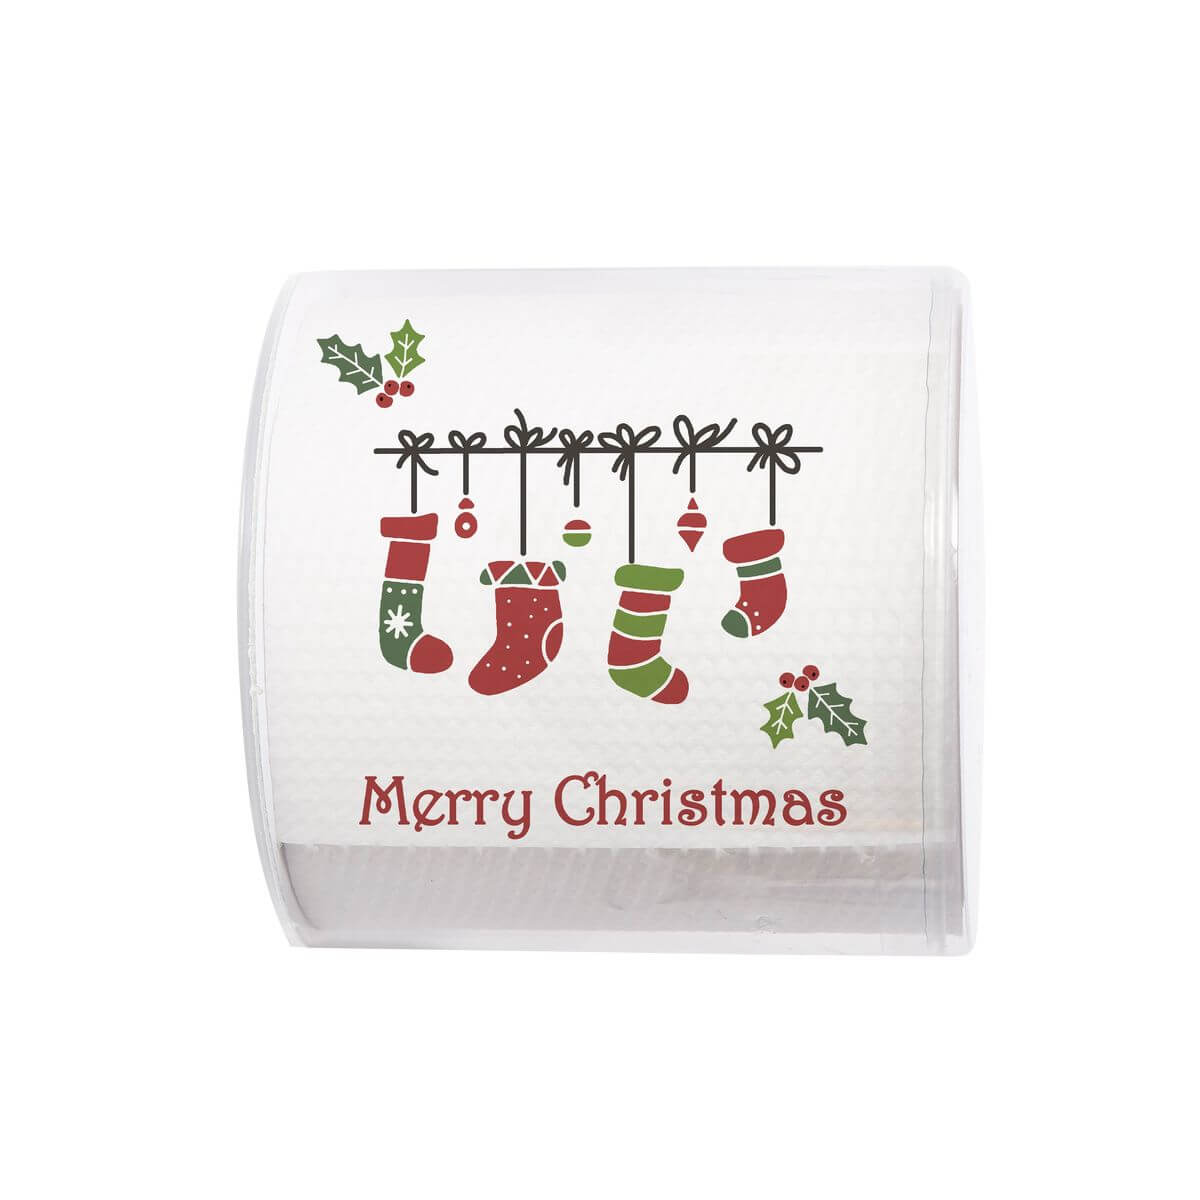 A roll of Christmas themed toilet paper with Christmas stockings and "Merry Christmas" printed on the paper